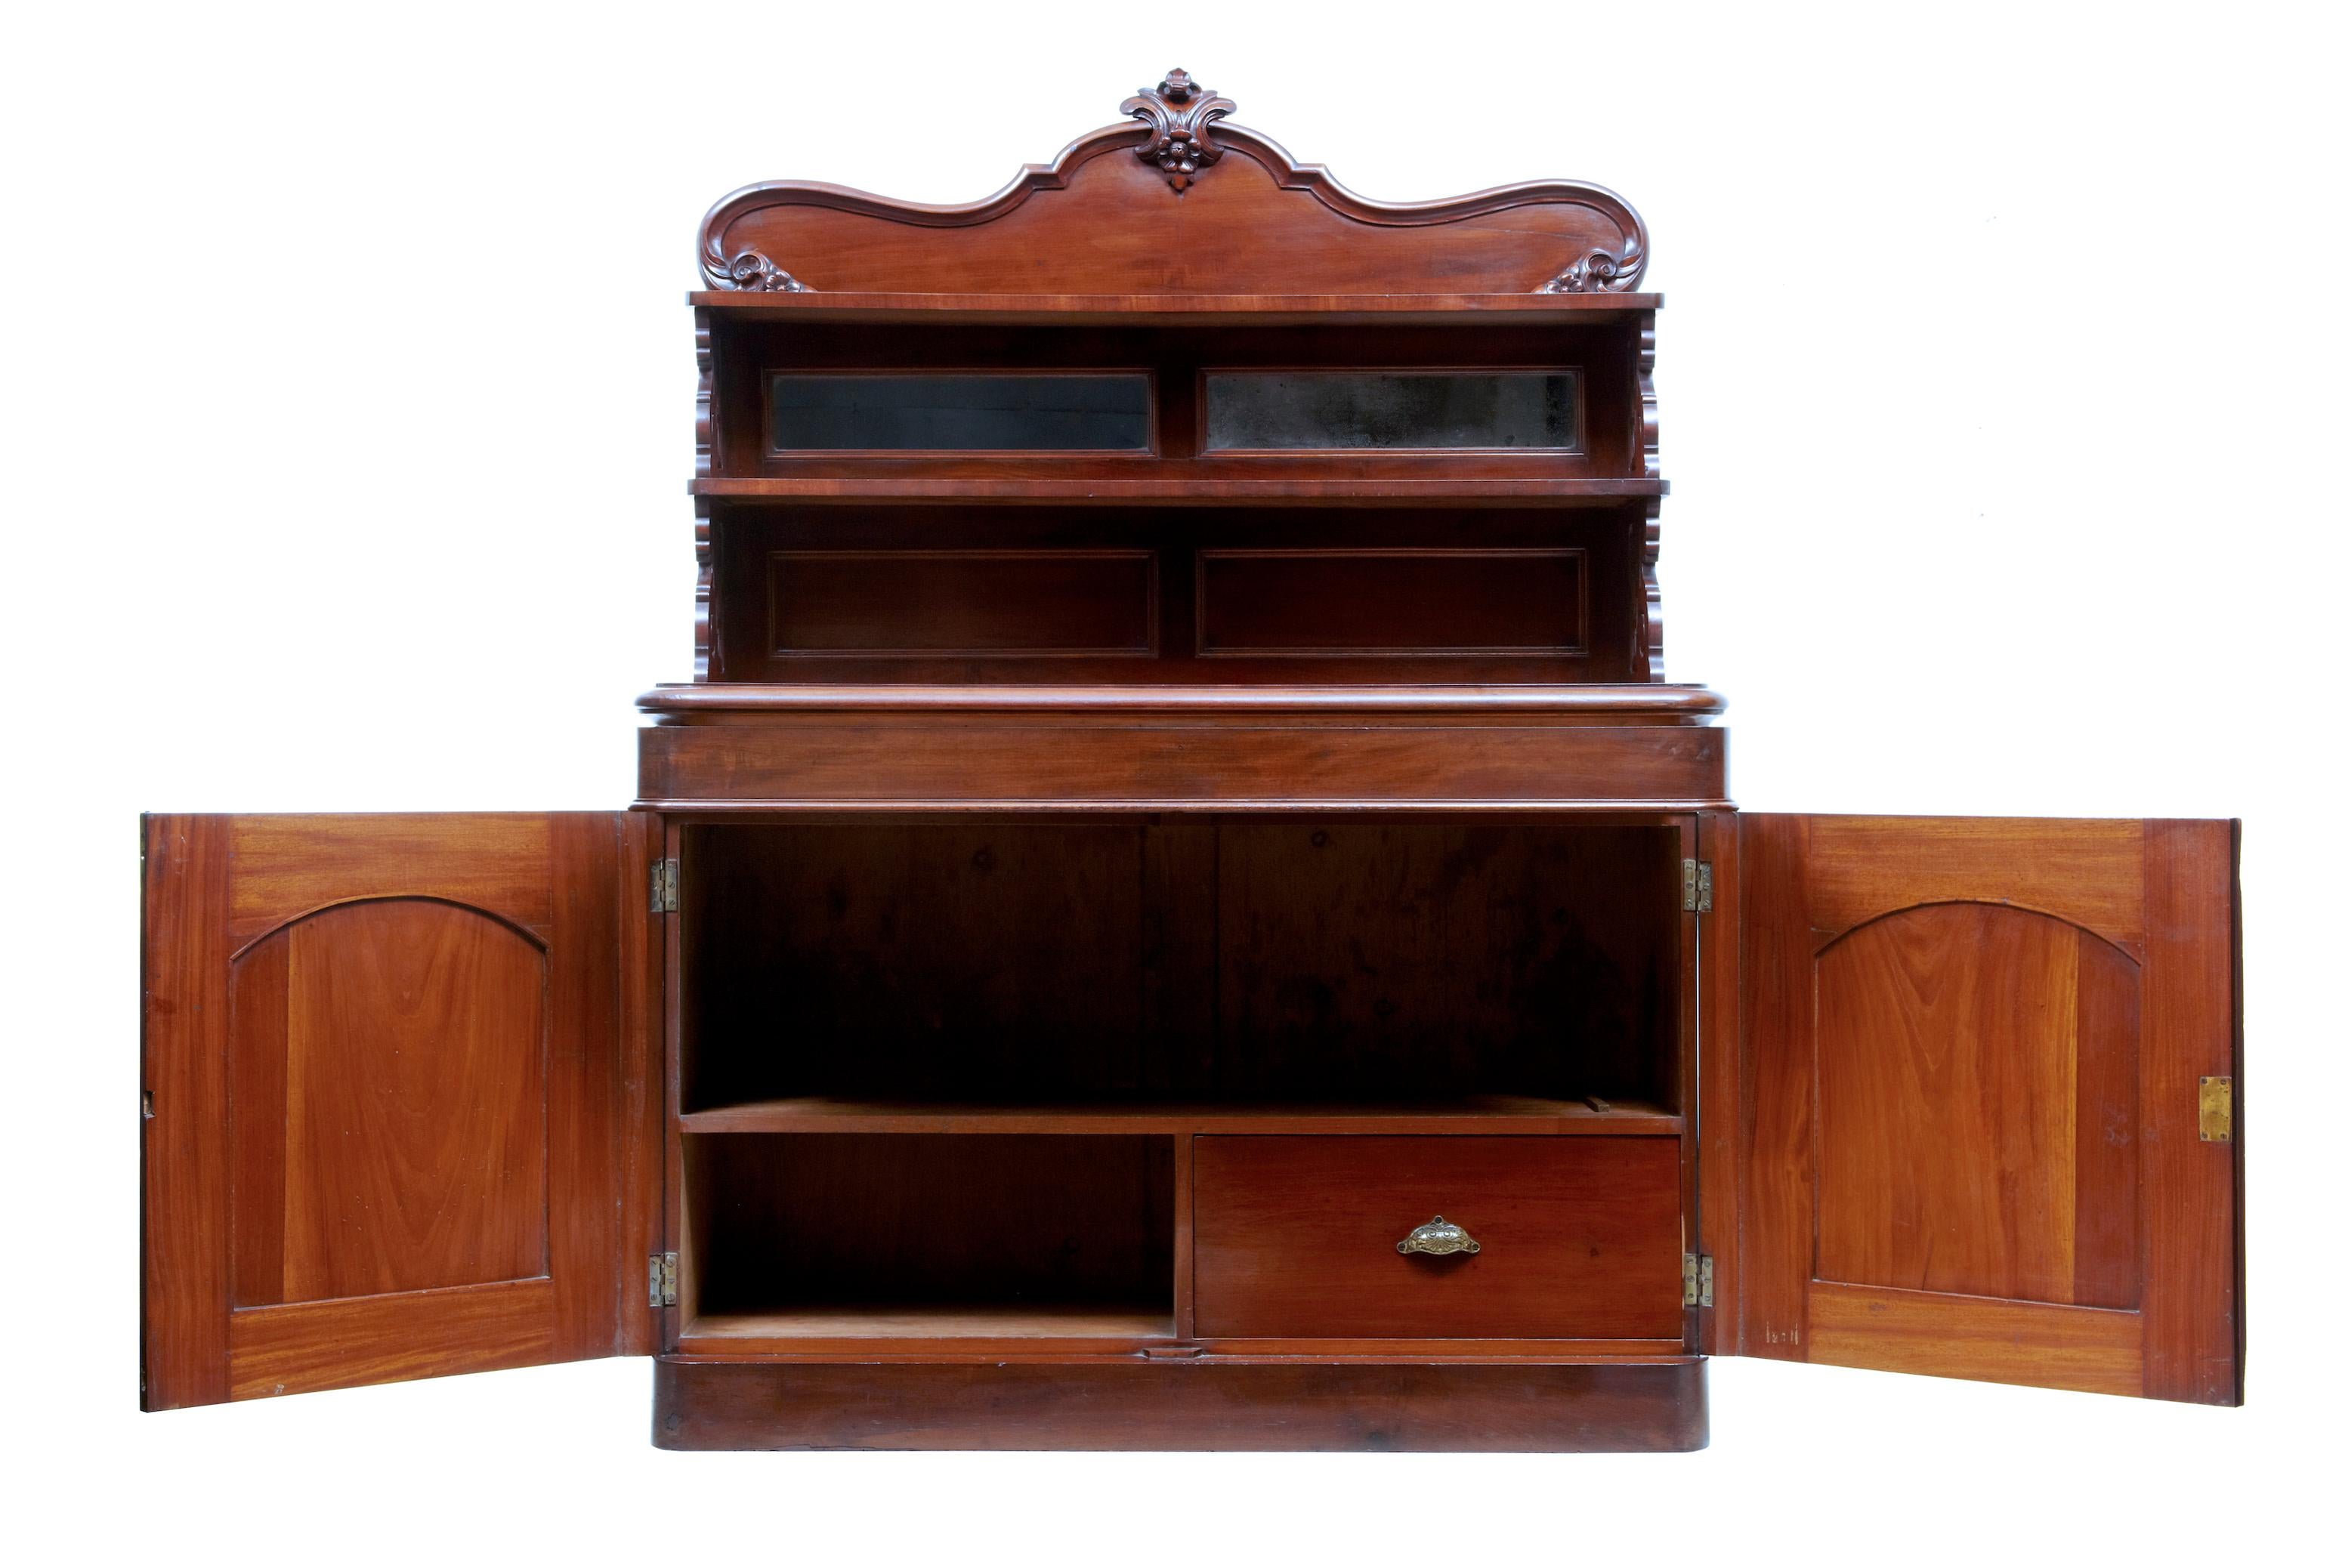 19th century French mahogany chiffonier sideboard circa 1880.

Chiffonier with Aesthetic Movement influences, made in rich mahogany.

Comprising of 2 sections. The top section with carved ornate gallery and shelf, below which 2 small mirrors